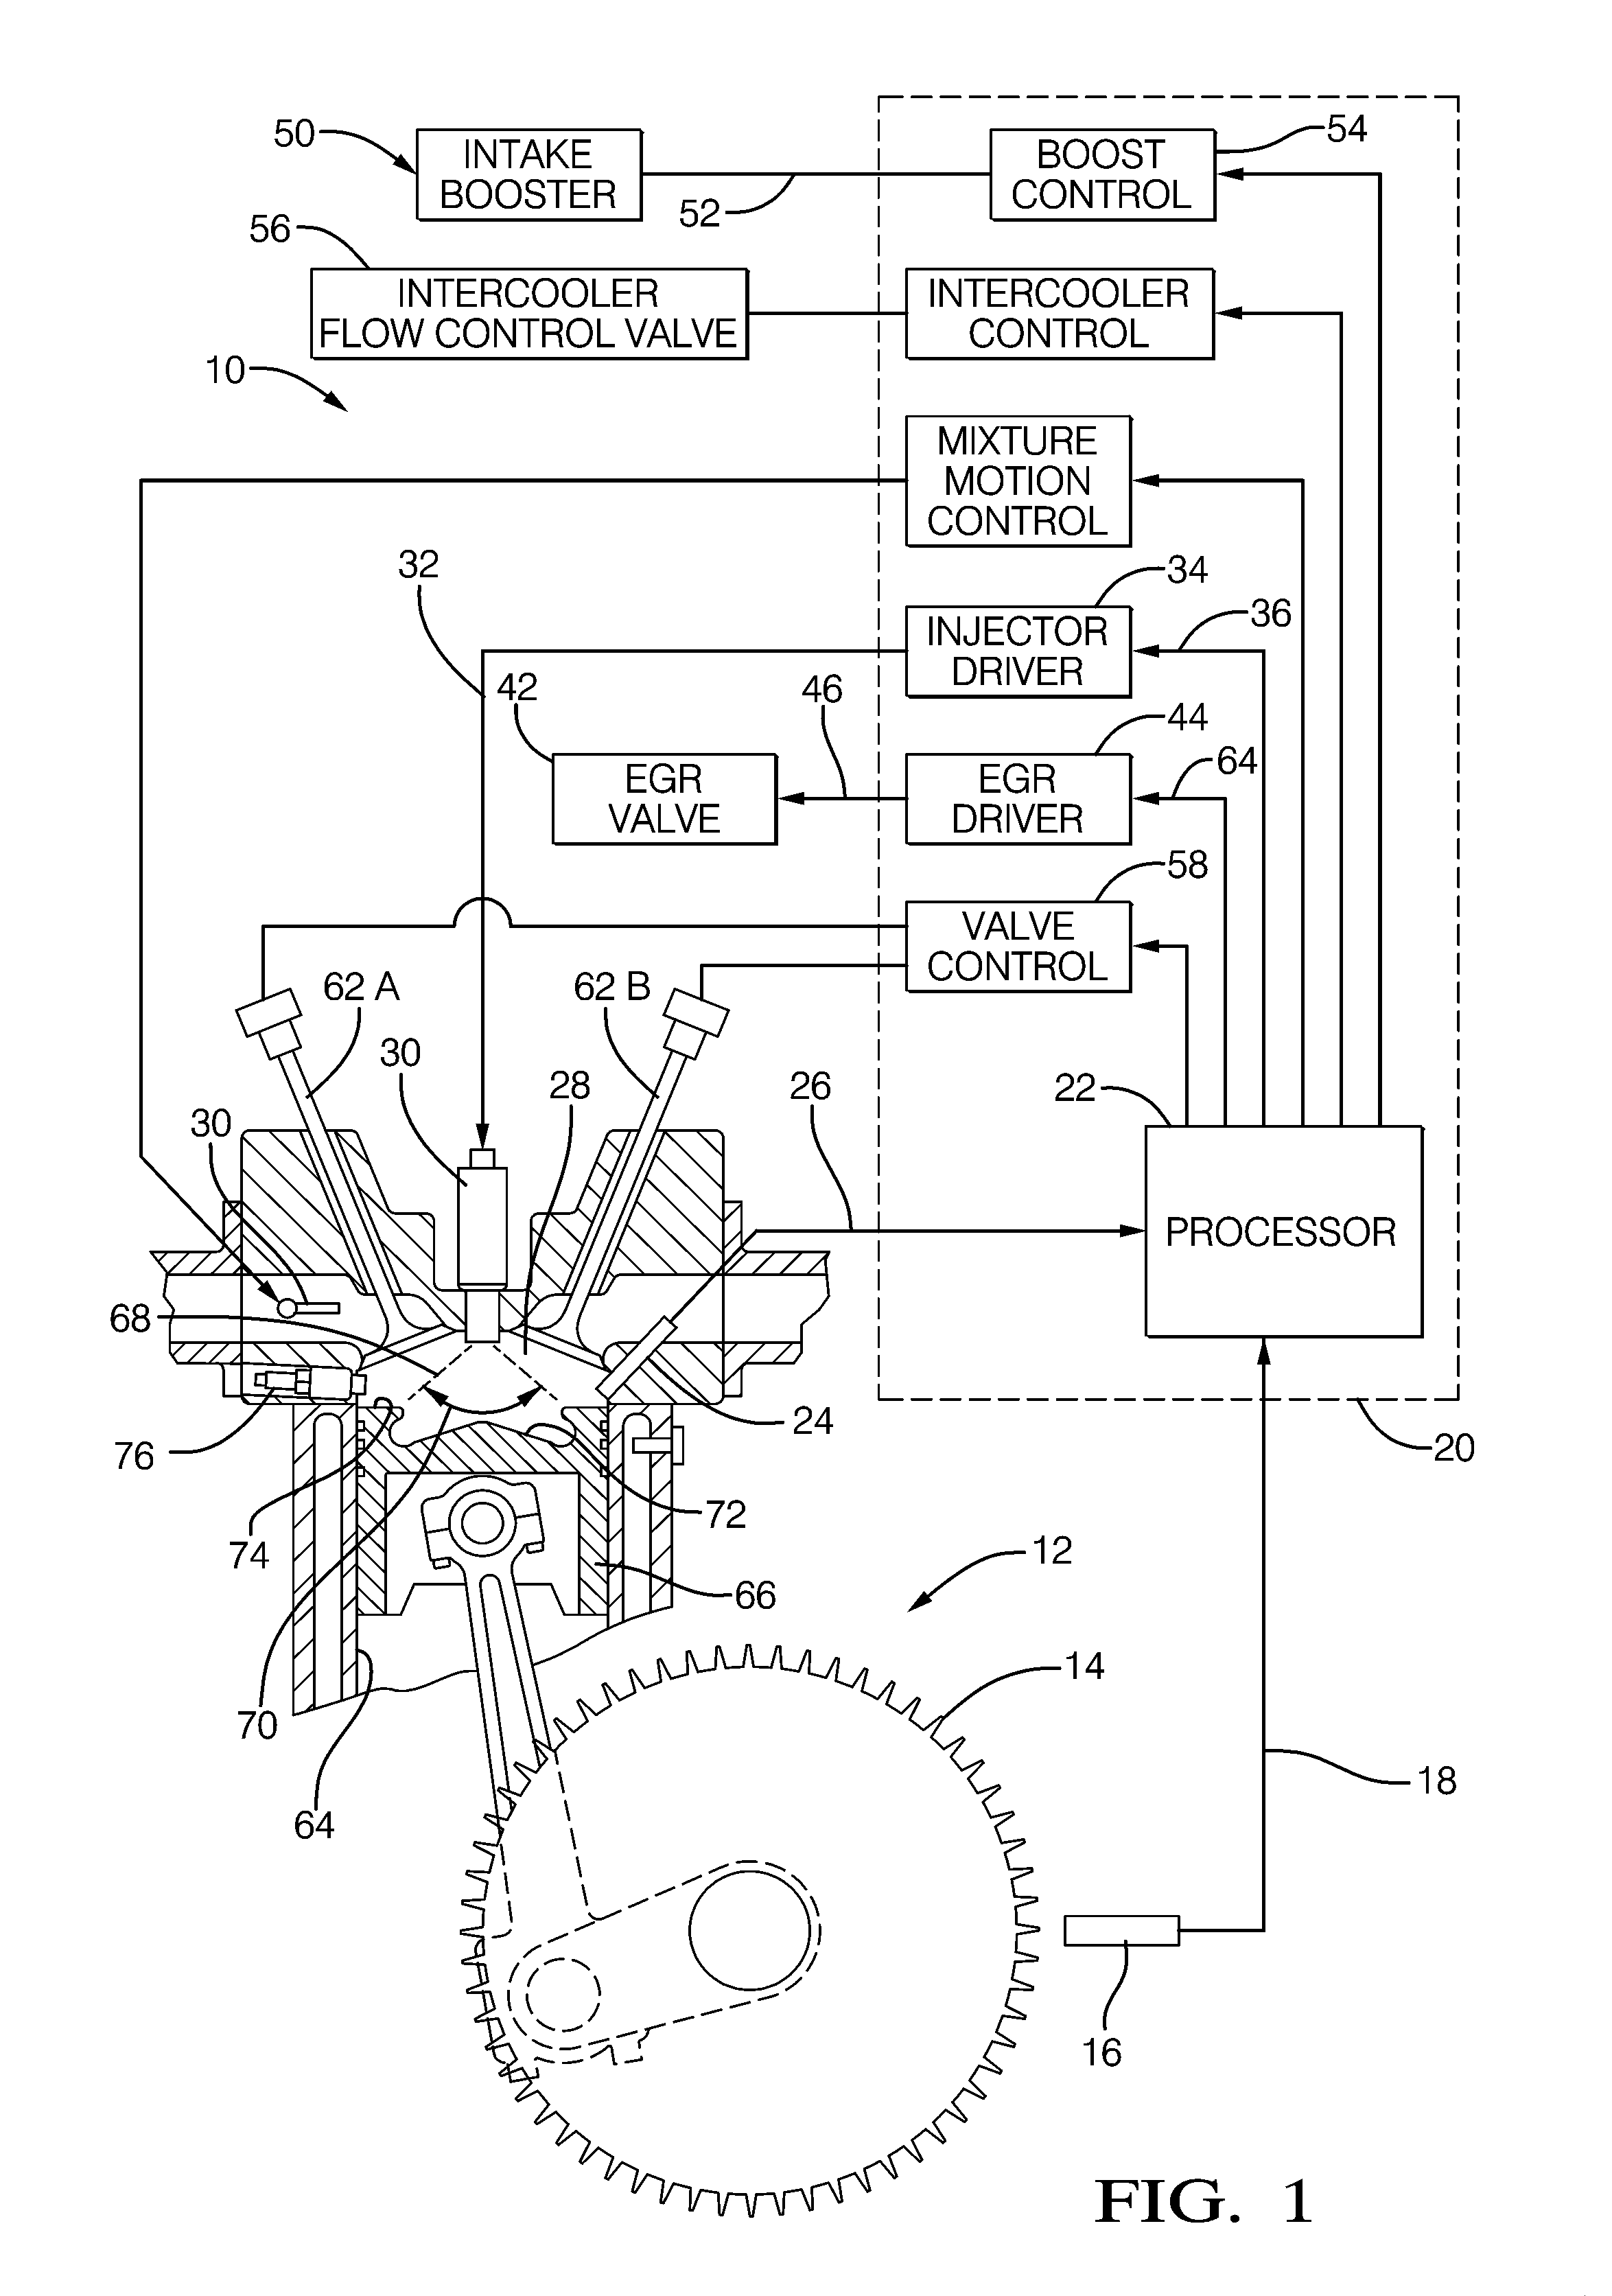 High-Efficiency Internal Combustion Engine and Method for Operating Employing Full-Time Low-Temperature Partially-Premixed Compression Ignition with Low Emissions